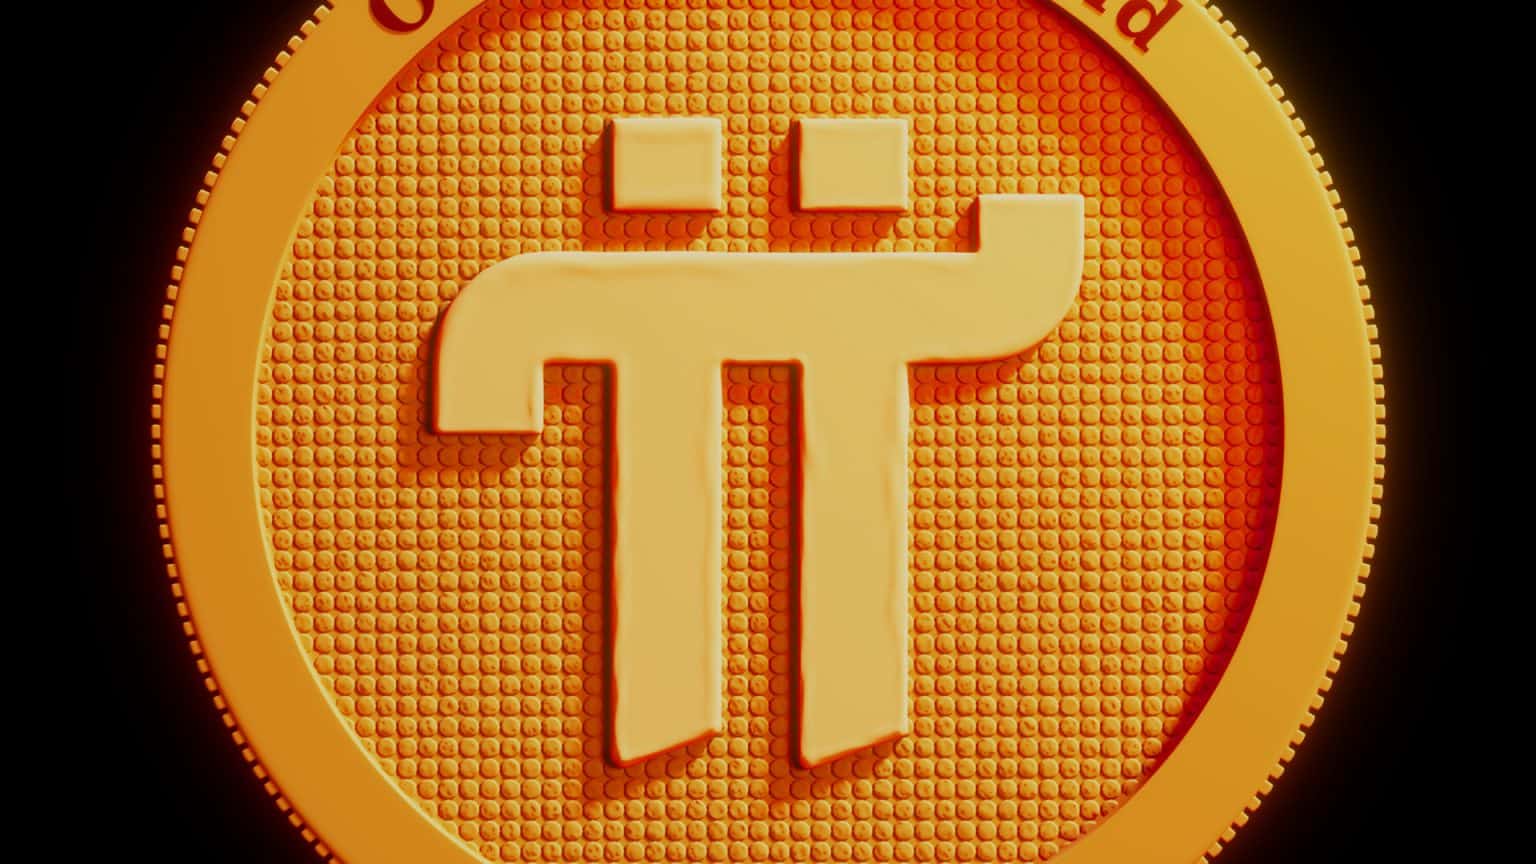 Pi Coin Price Forecast Hinges on Launch, But Timeline is Unclear